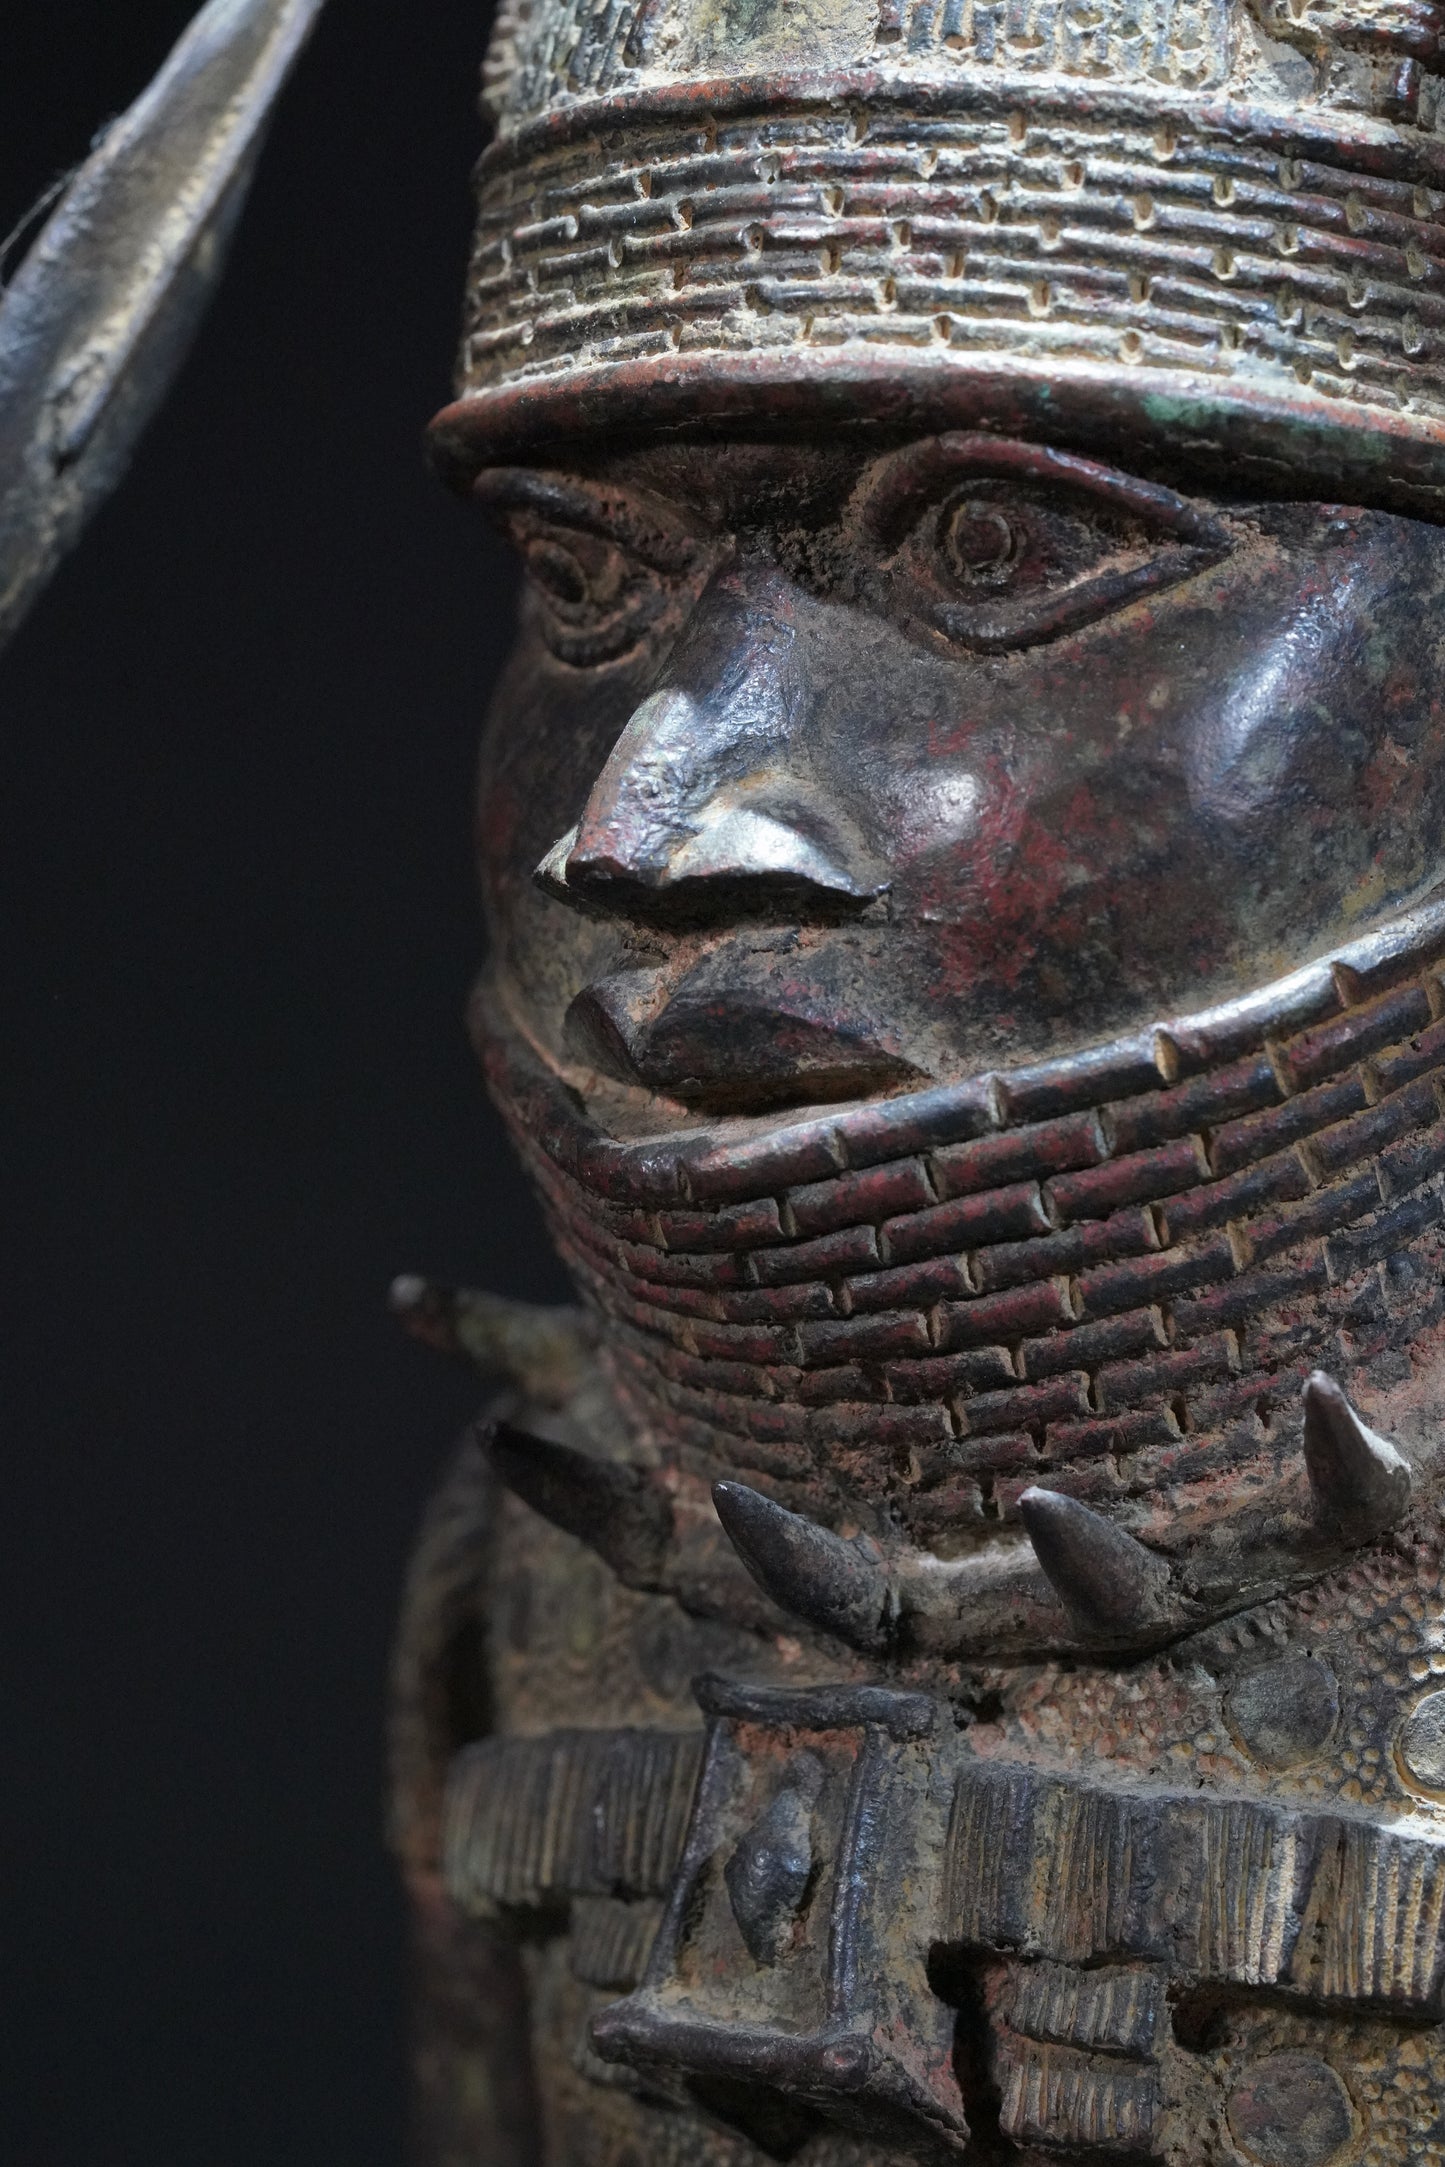 A Dignitary, brass, lost mould casting, Benin